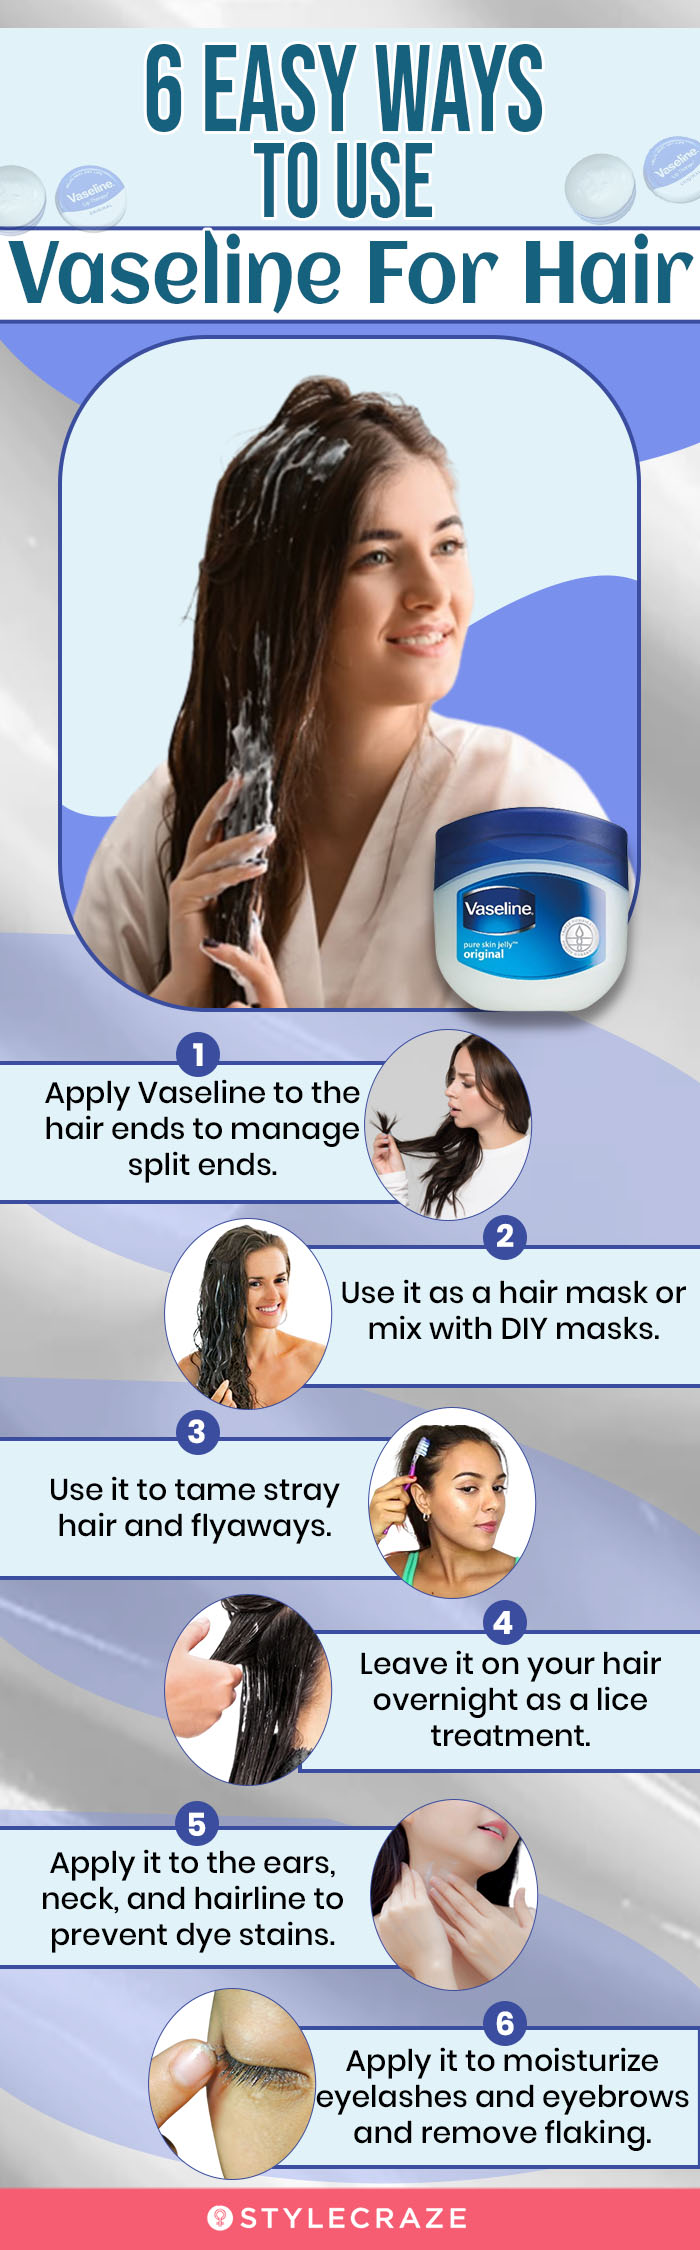 Vaseline For Hair: Is It Safe to Use Petroleum Jelly for Hair Growth?